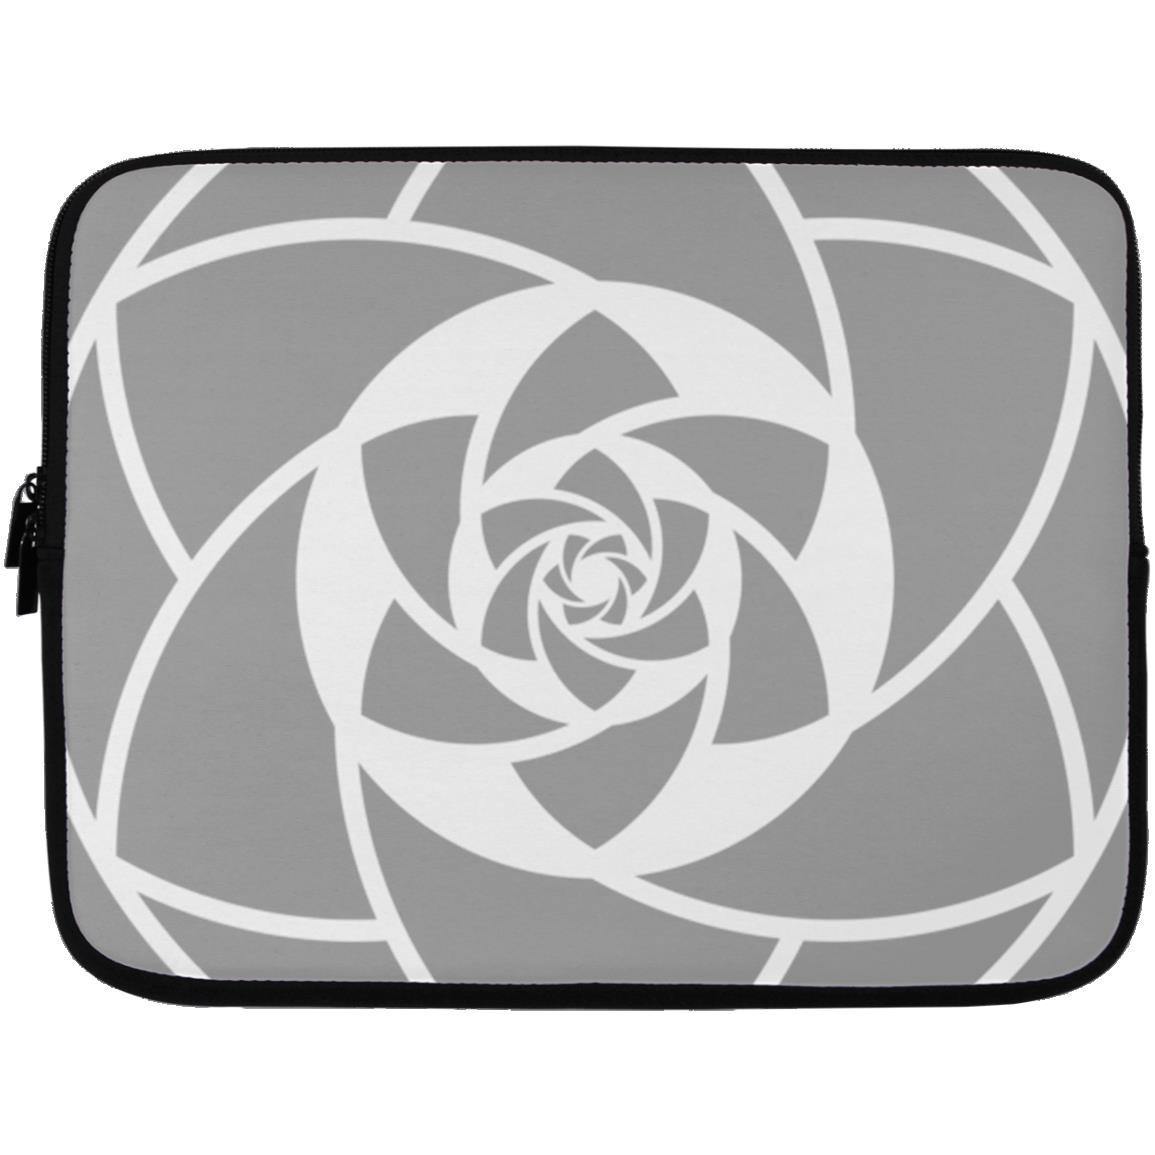 Crop Circle Laptop Sleeve - West Overton 2 - Shapes of Wisdom